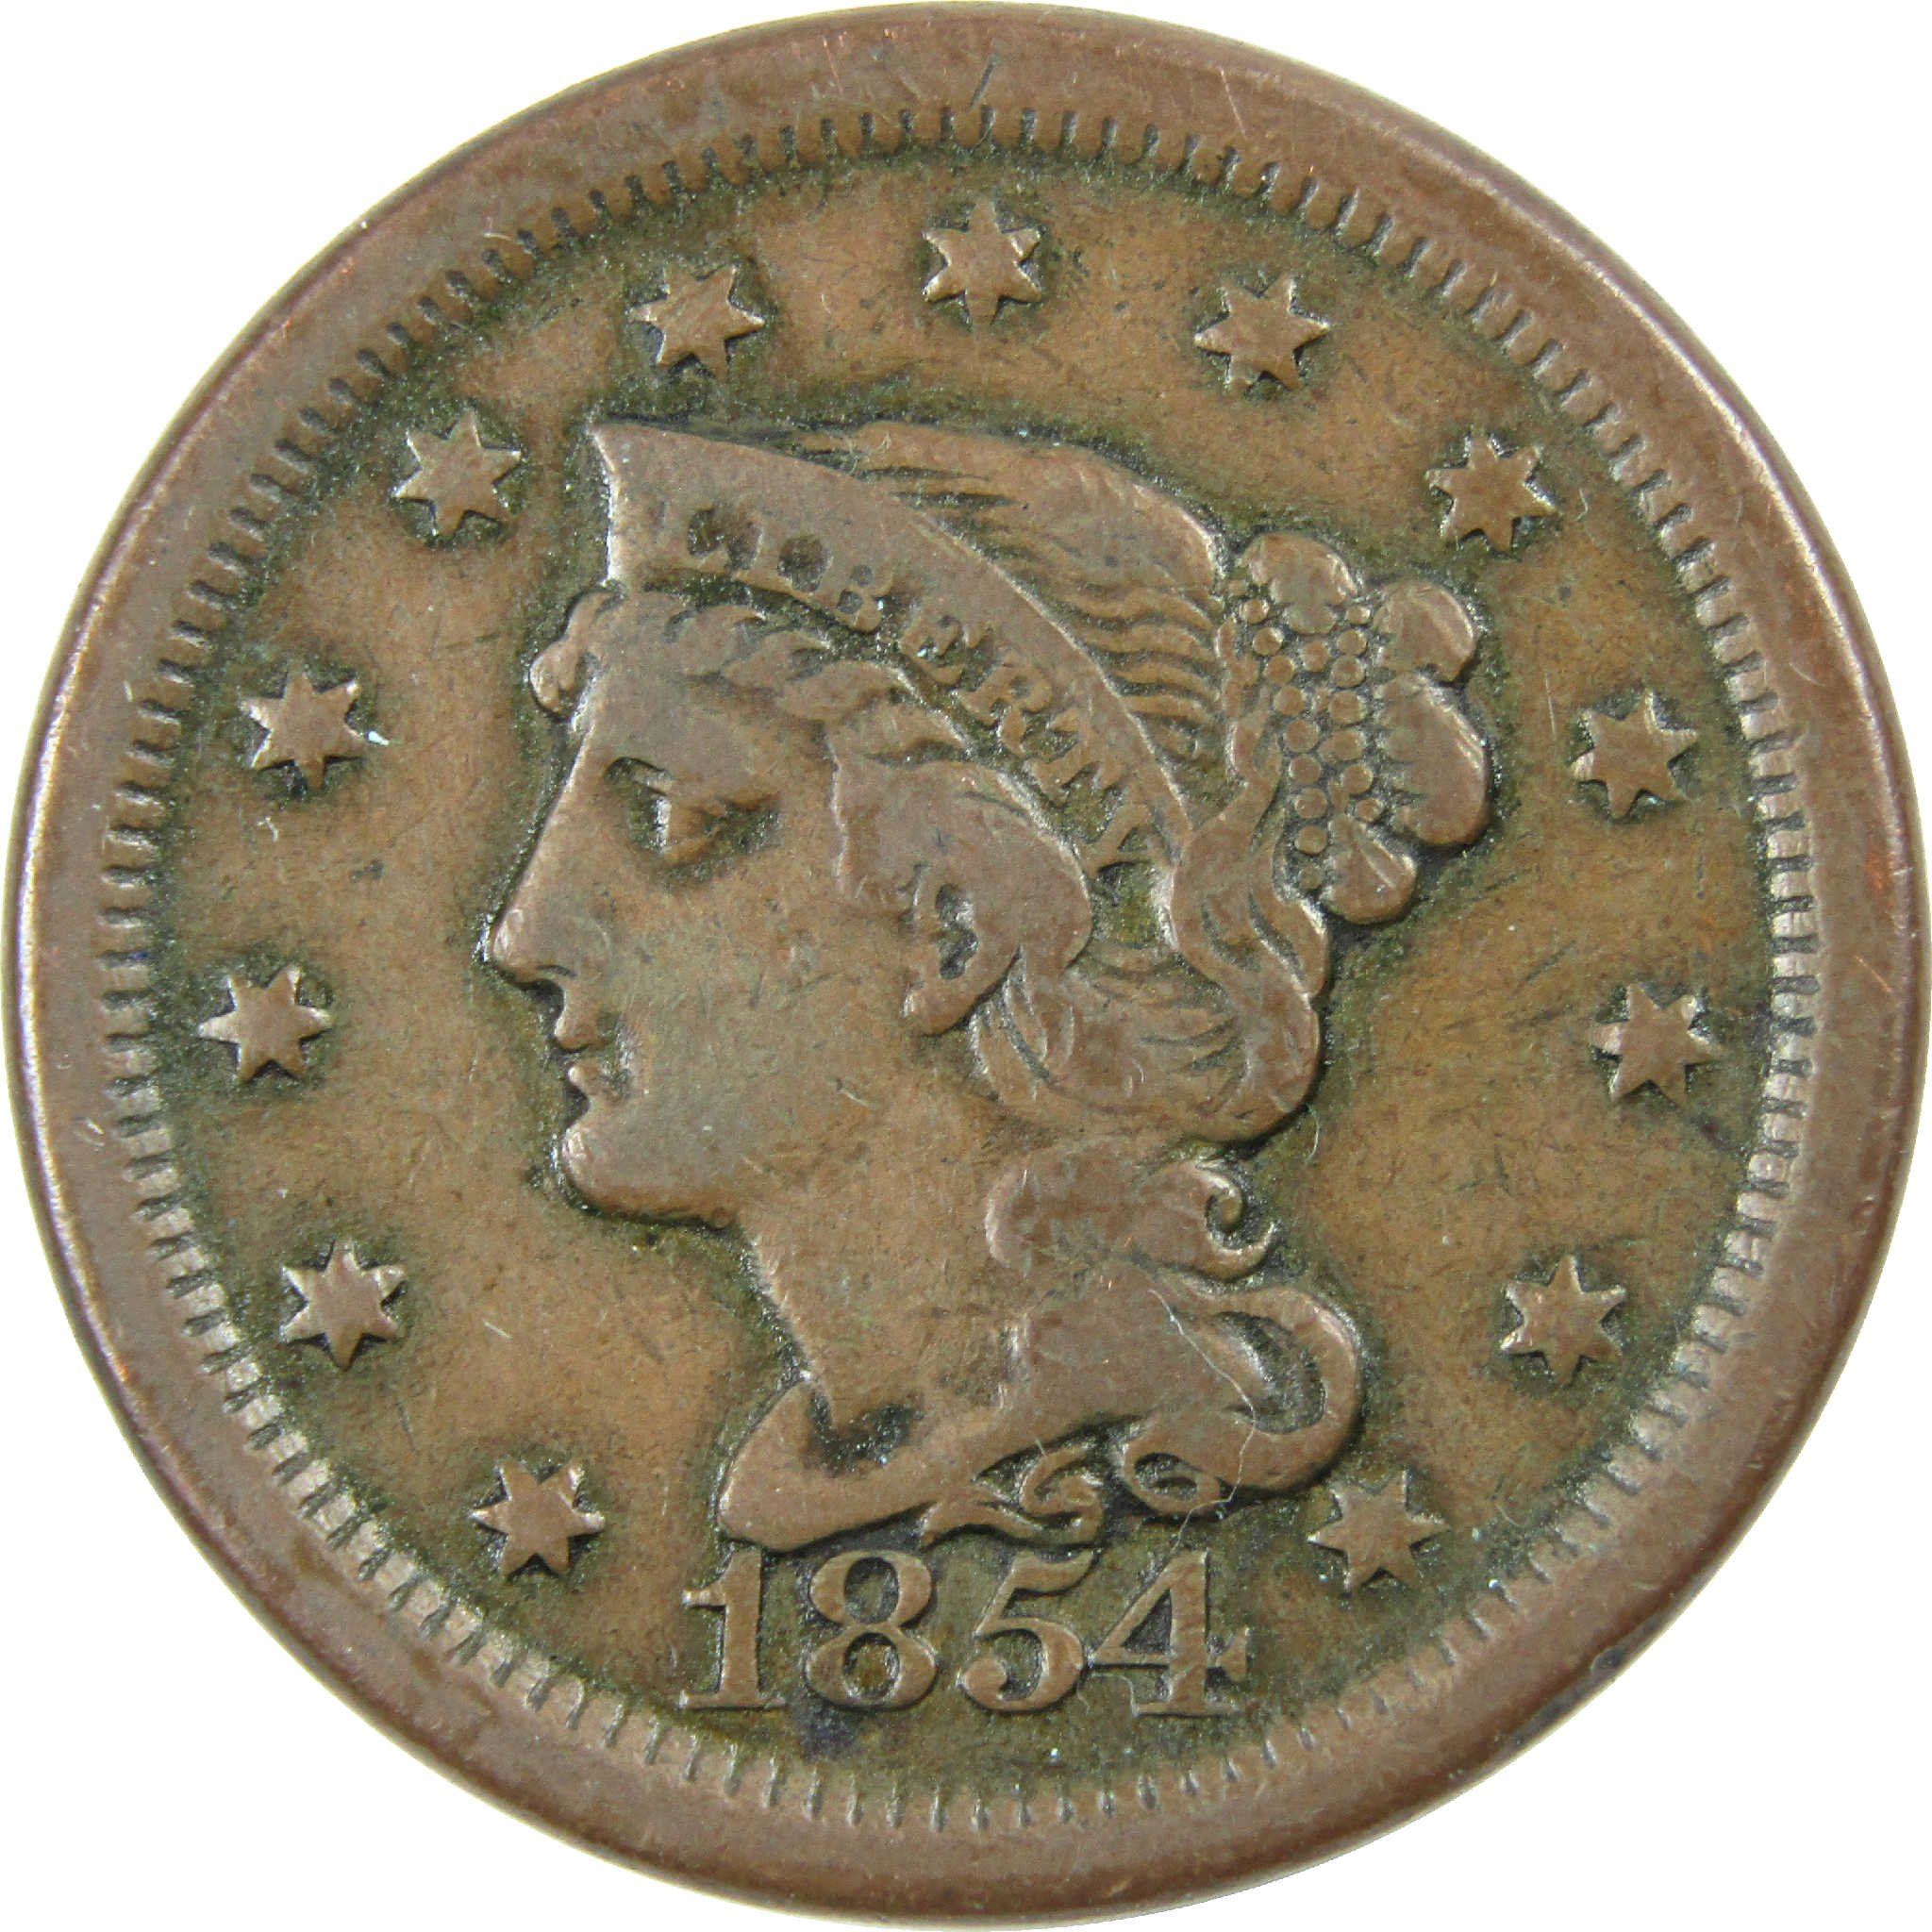 1854 Braided Hair Large Cent VF Very Fine Copper 1c SKU:I12153